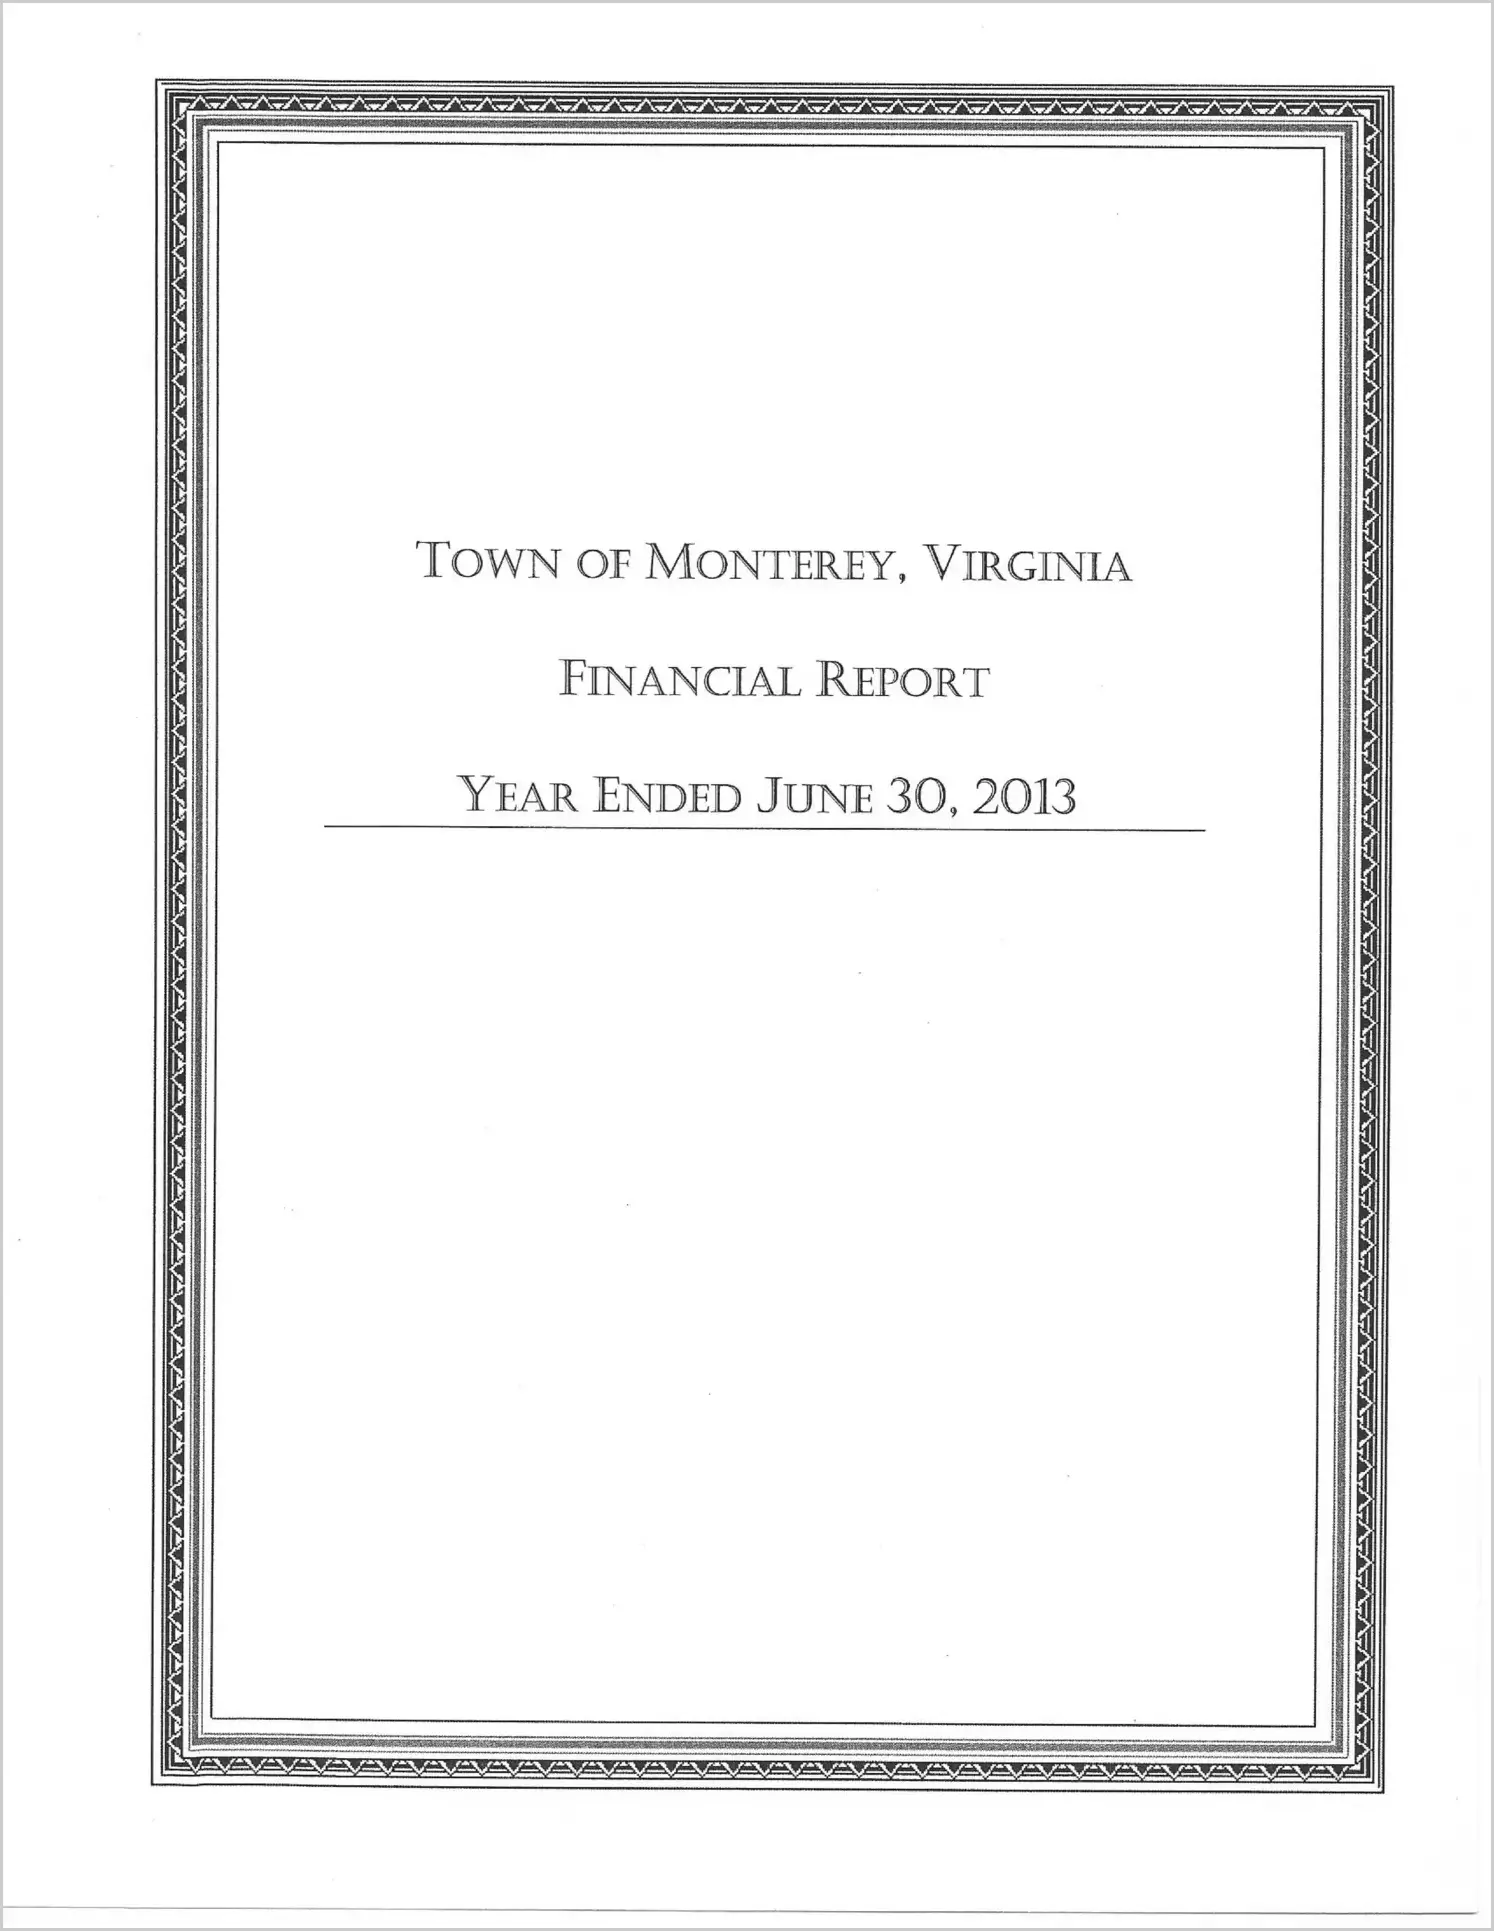 2013 Annual Financial Report for Town of Monterey